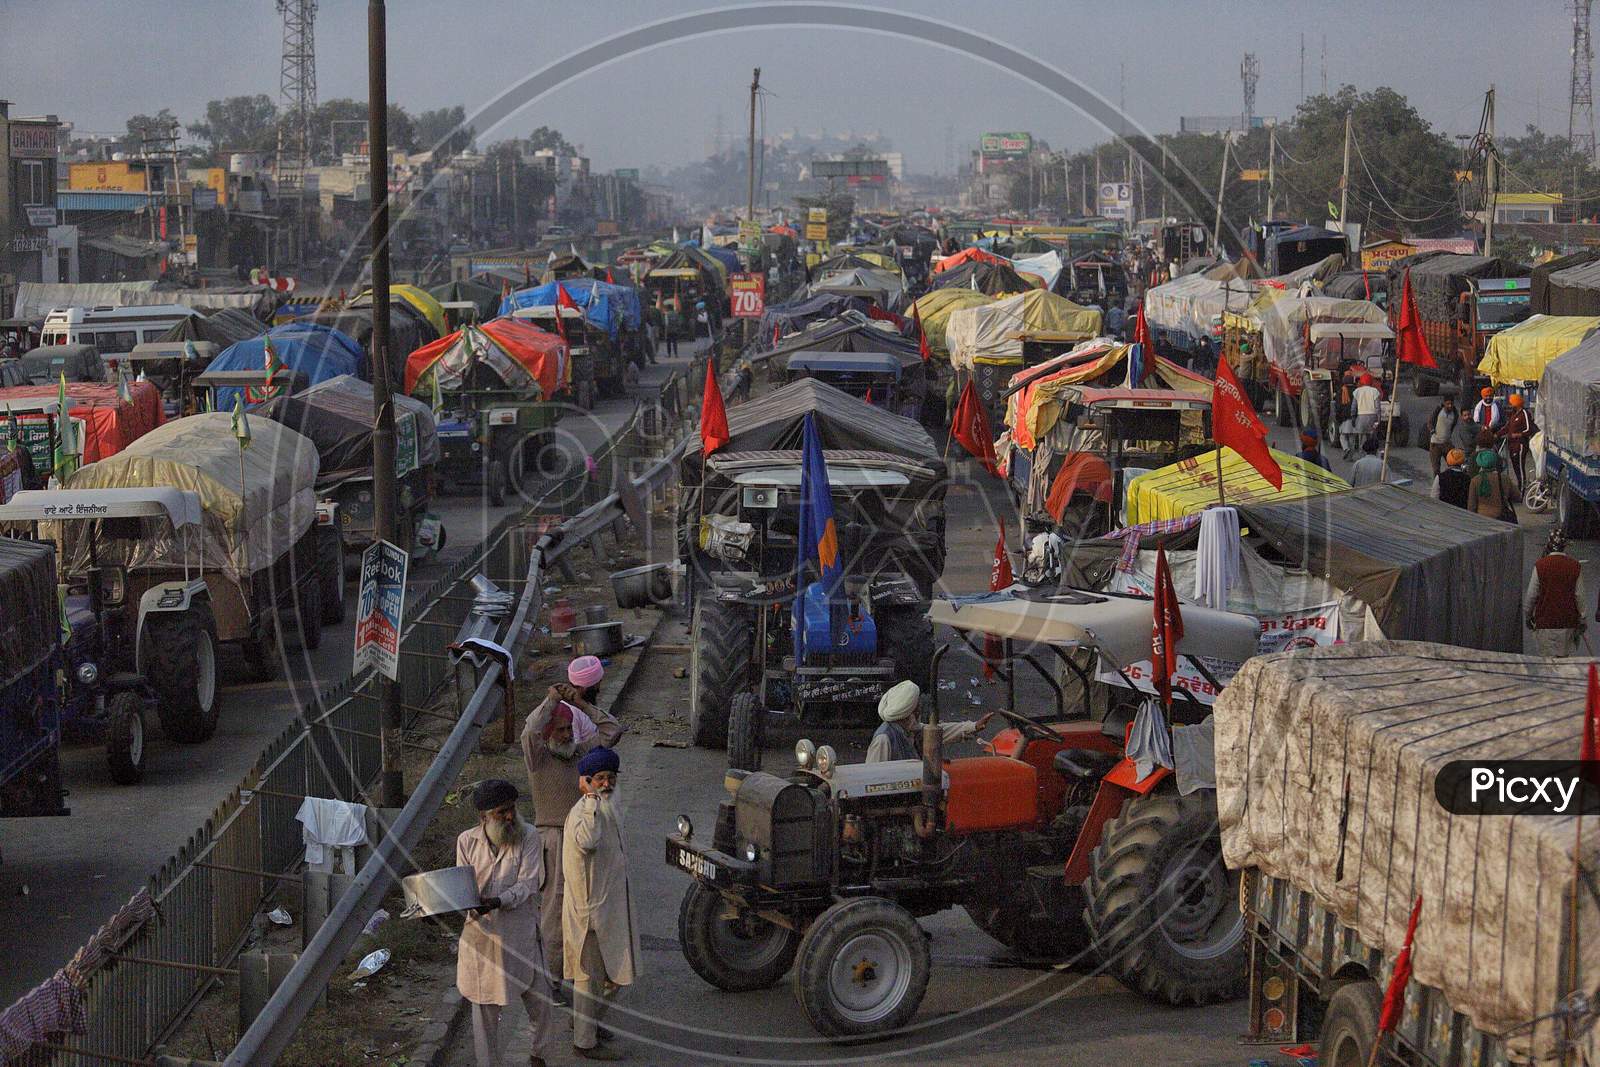 Farmers from a number of states continued to protest for fifth consecutive day on Nov, 30, 2020 at Delhi’s Singhu border. Farmers are protesting against  new farm laws that they fear will reduce their earnings and give more power to large retailers.